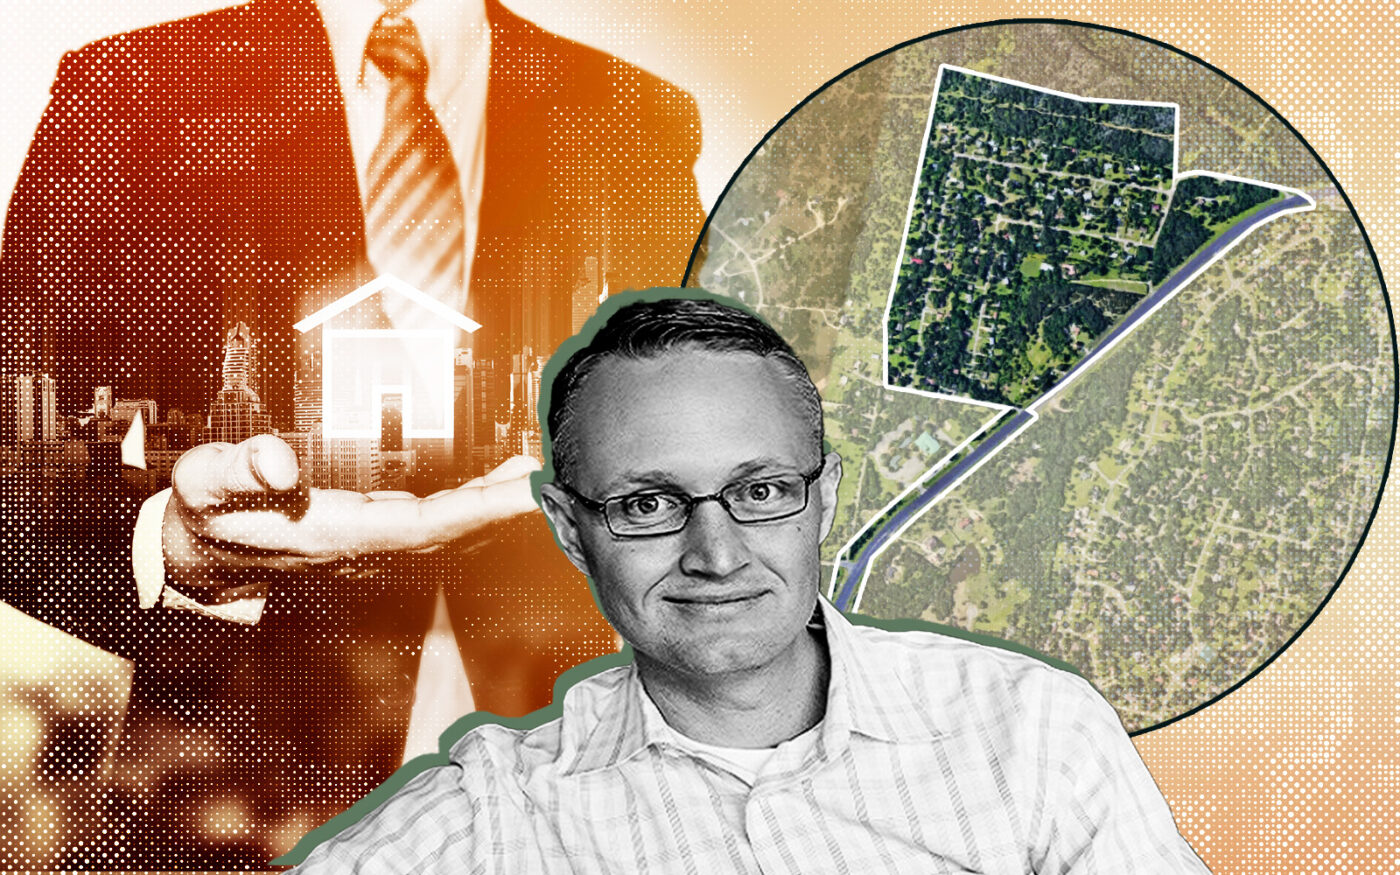 Texas Cities, Developers Clashing Over De-annexation Law